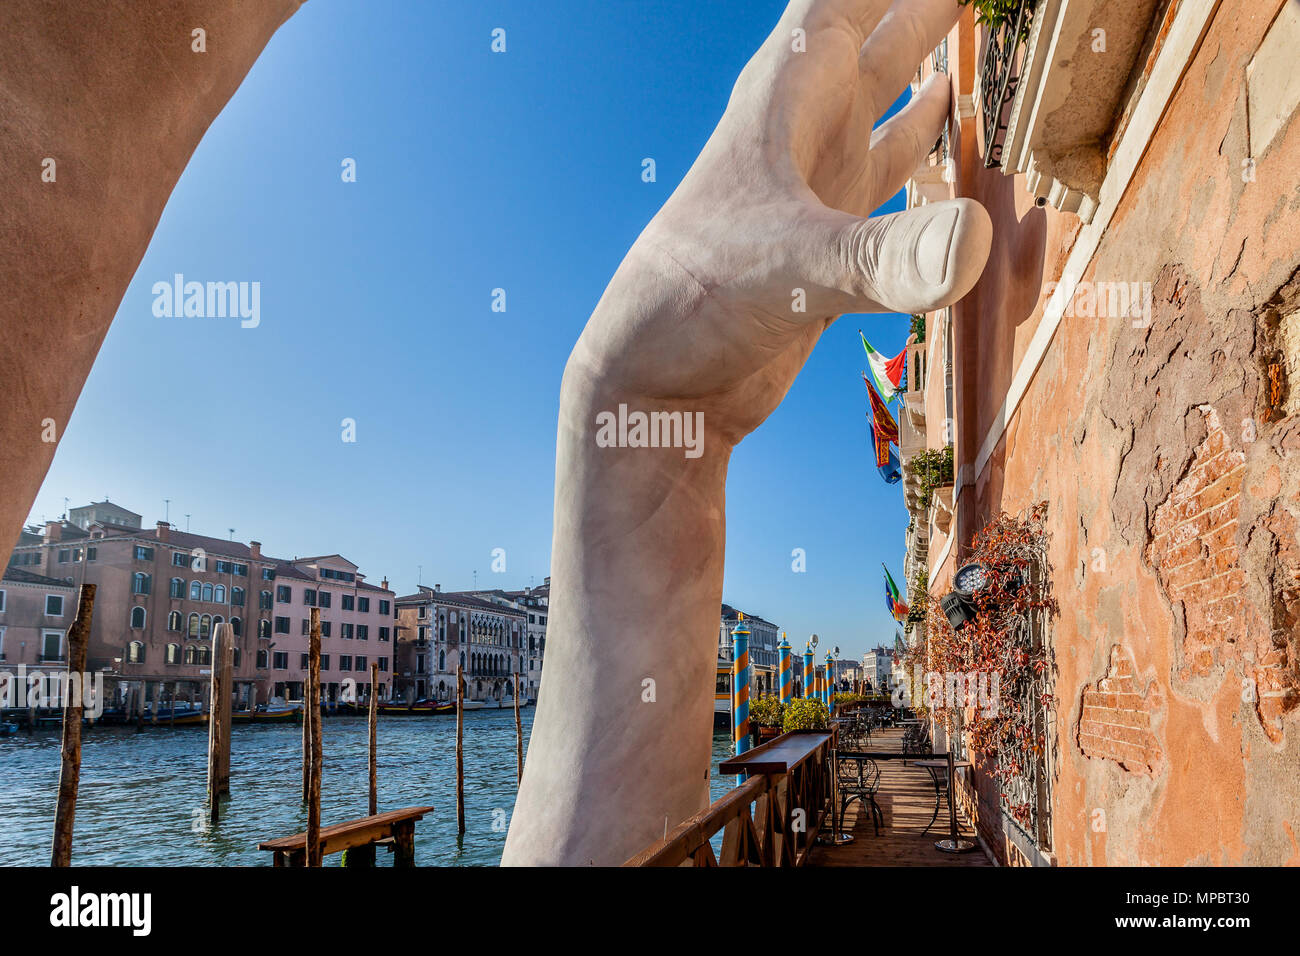 VENICE, ITALY - JANUARY 02 2018: Lorenzo Qinn scuplture exhibition at Ca Sagredo.  The sculpture symbolizes the support for the palaces of Venice that Stock Photo